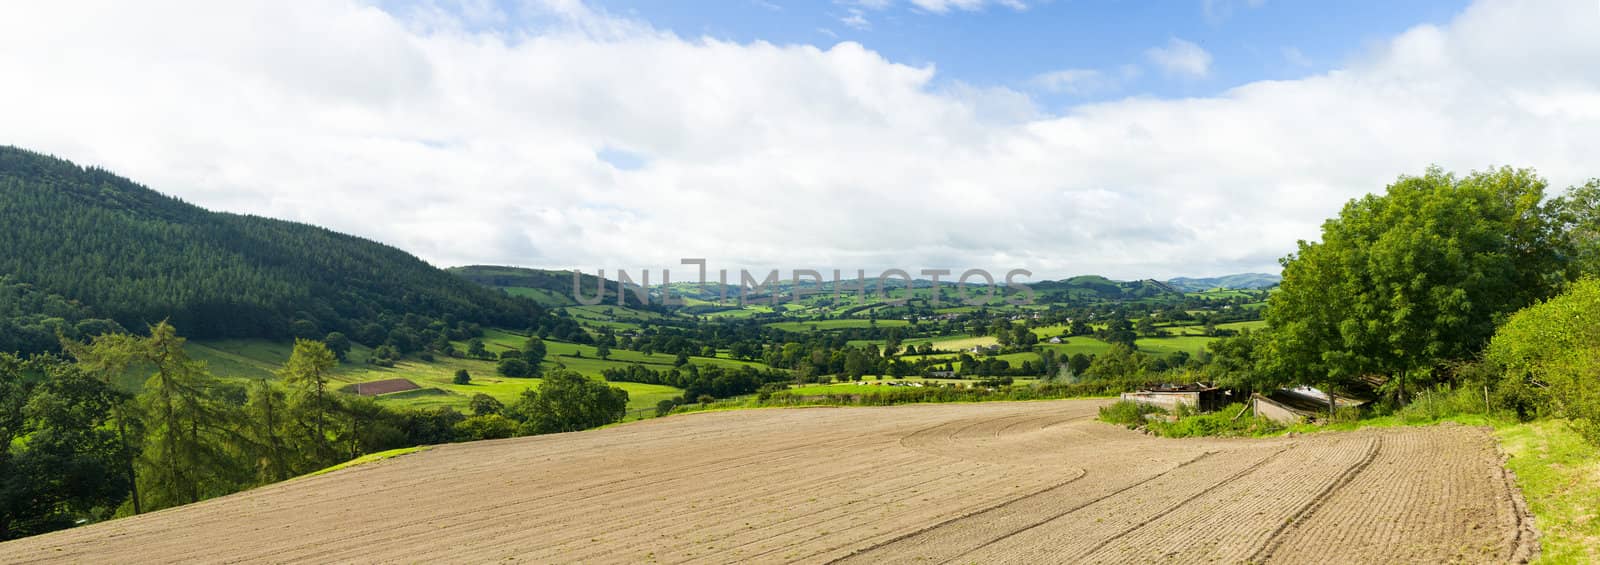 Broad panorama of the countryside in North Wales with ploughed field in foreground